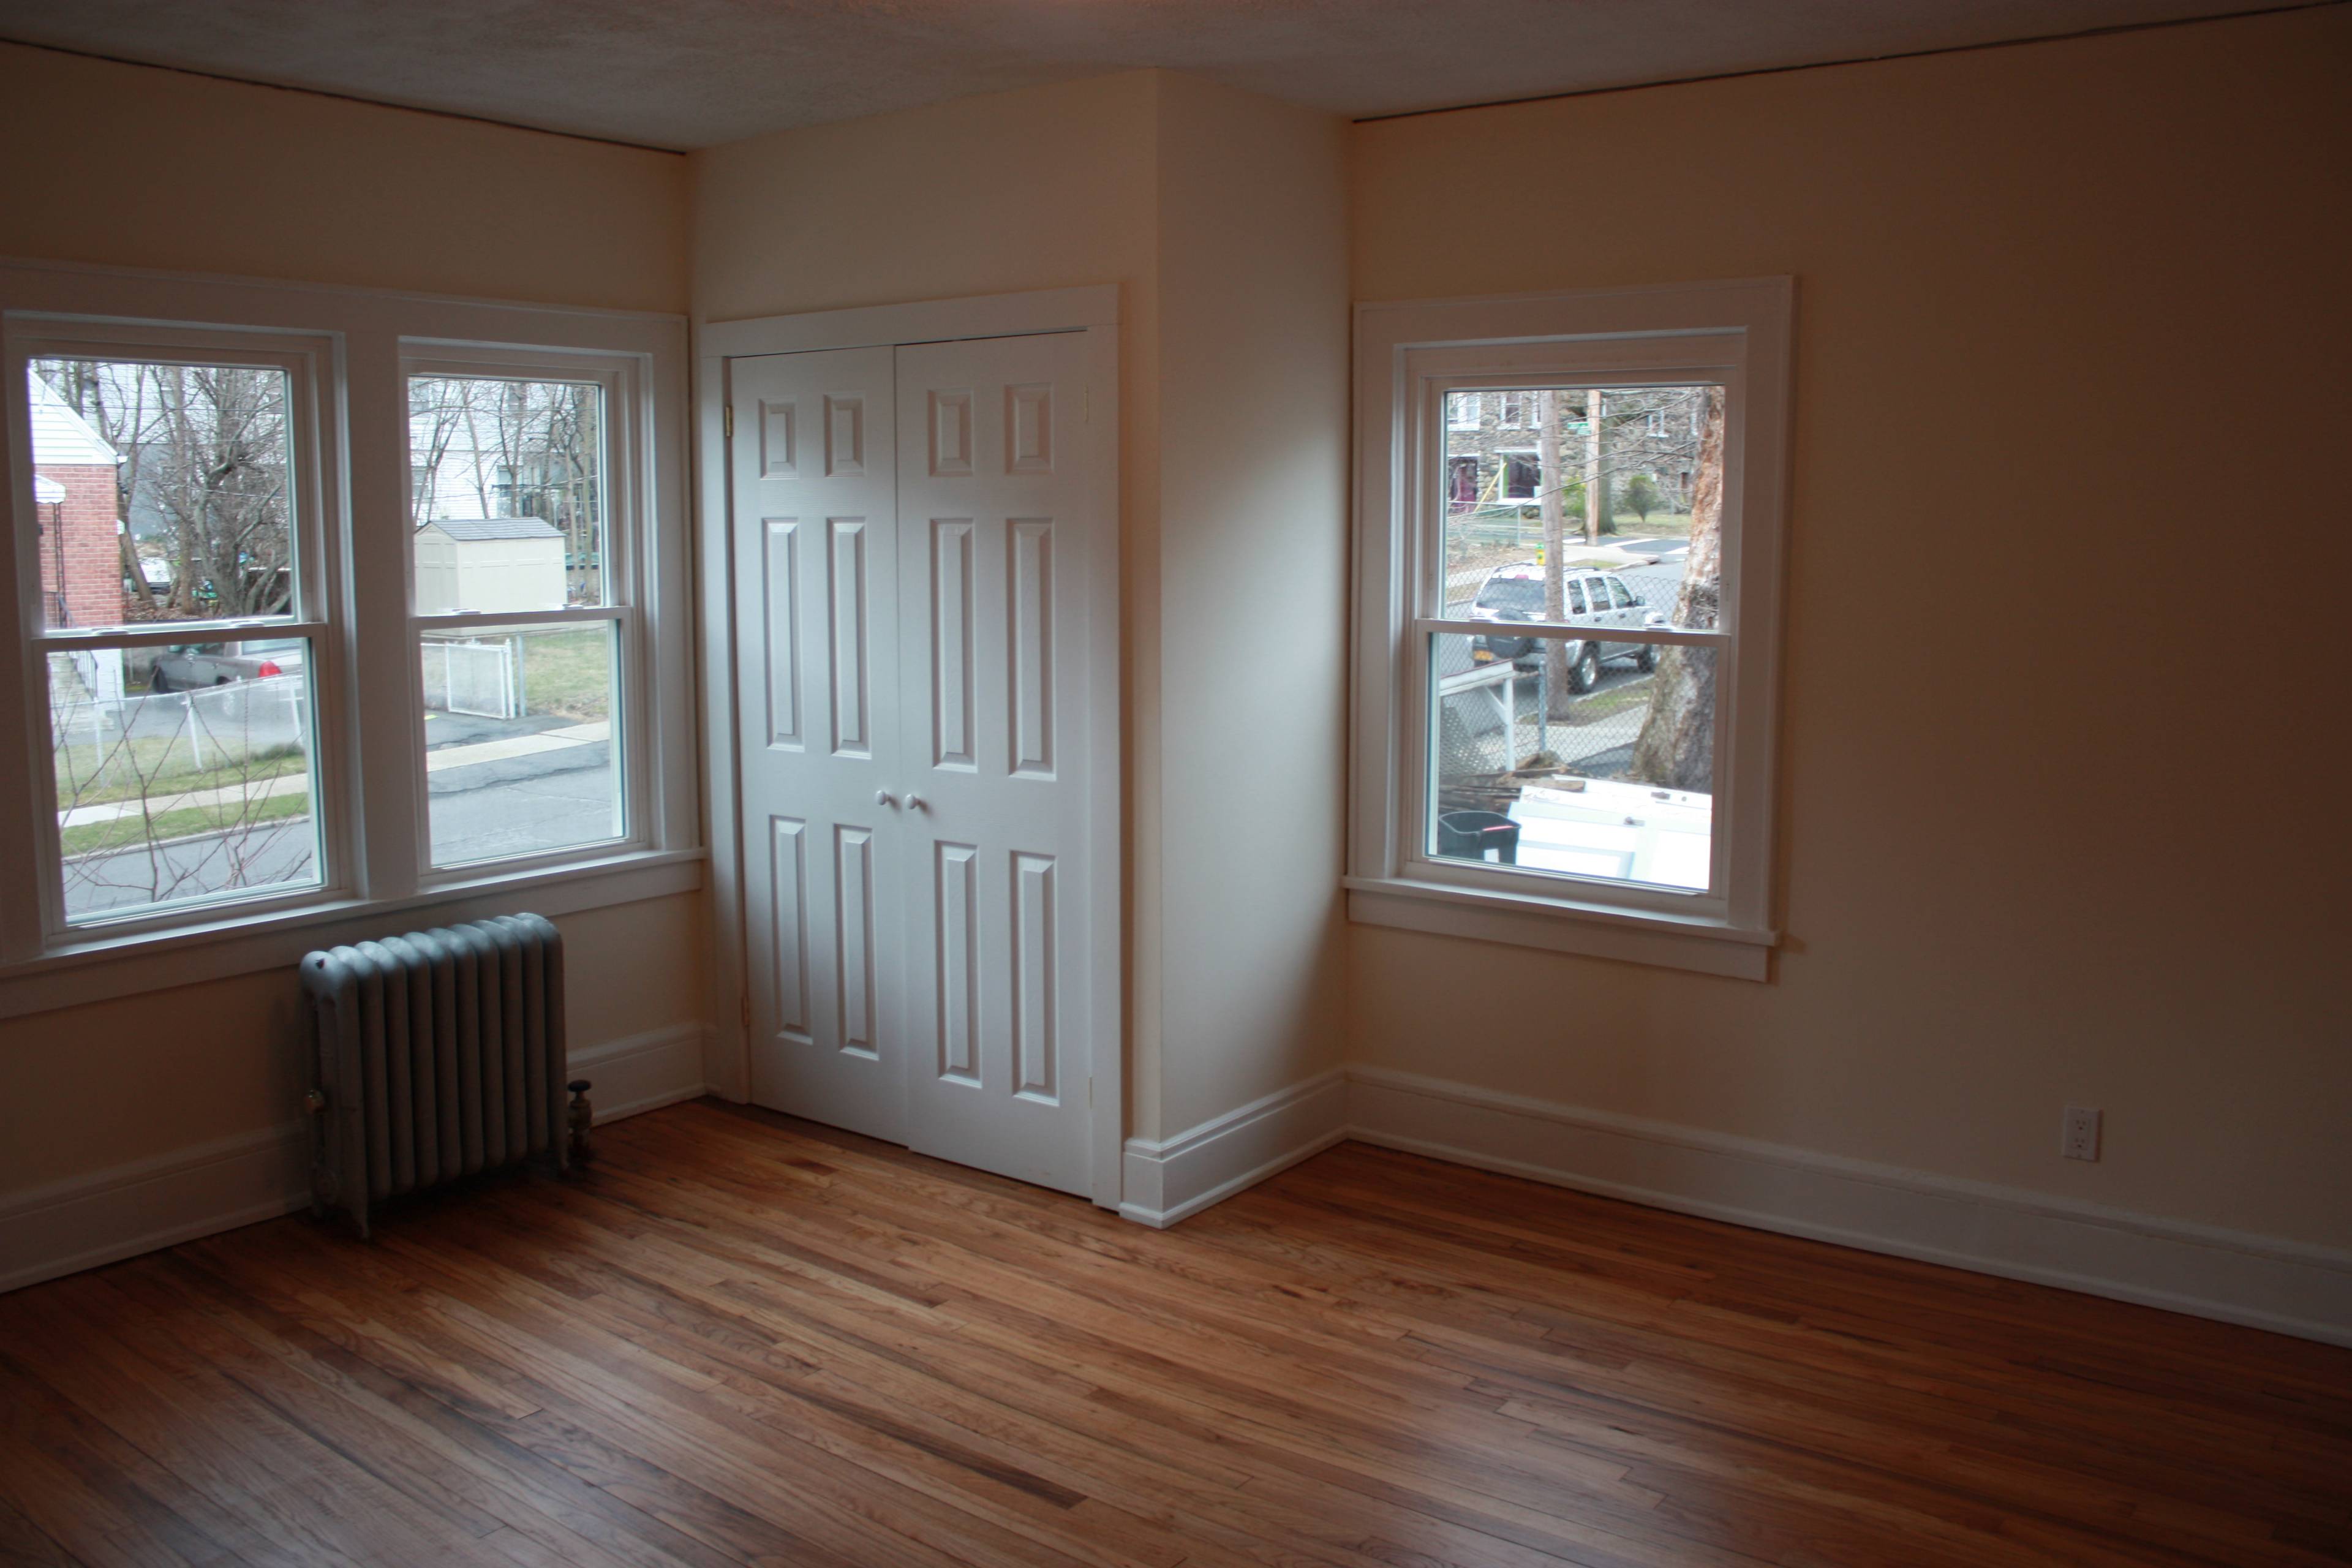 CHARMING TWO BEDROOM IN WHITE PLAINS IN WESTCHESTER! NEWLY RENOVATED BATHROOM AND KITCHEN